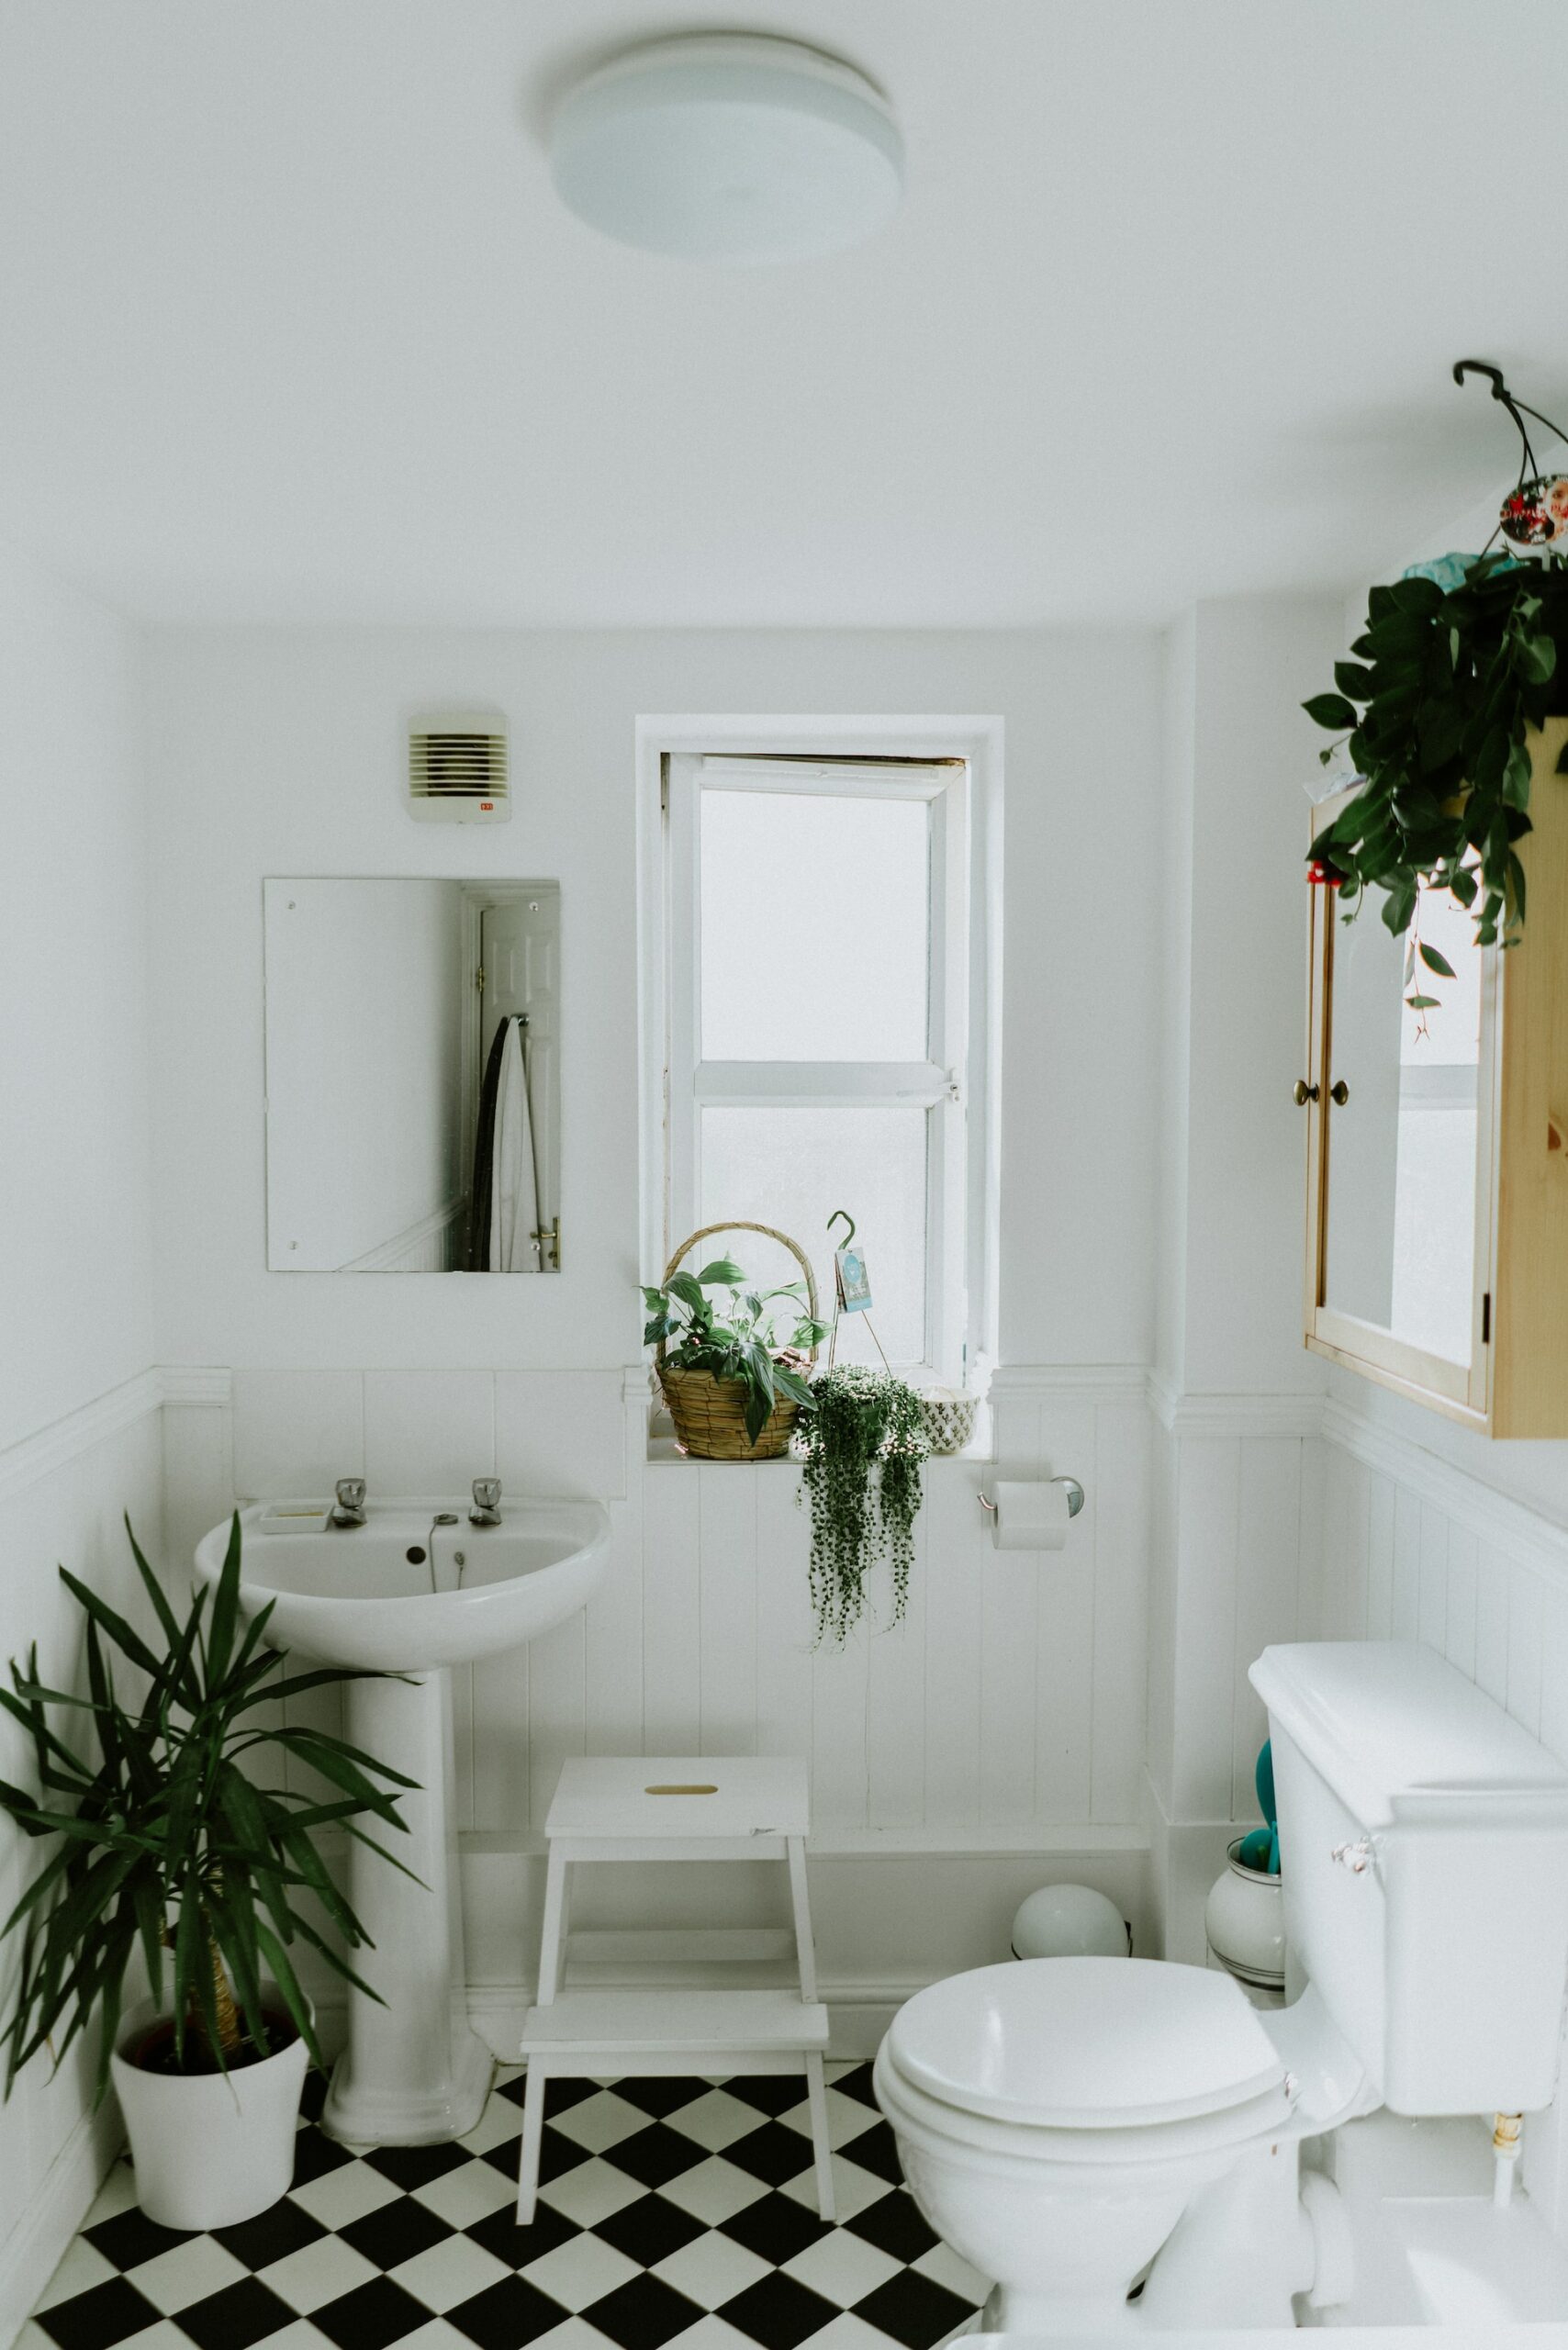 A white bathroom with several houseplants and black-and-white checkered floor tile.